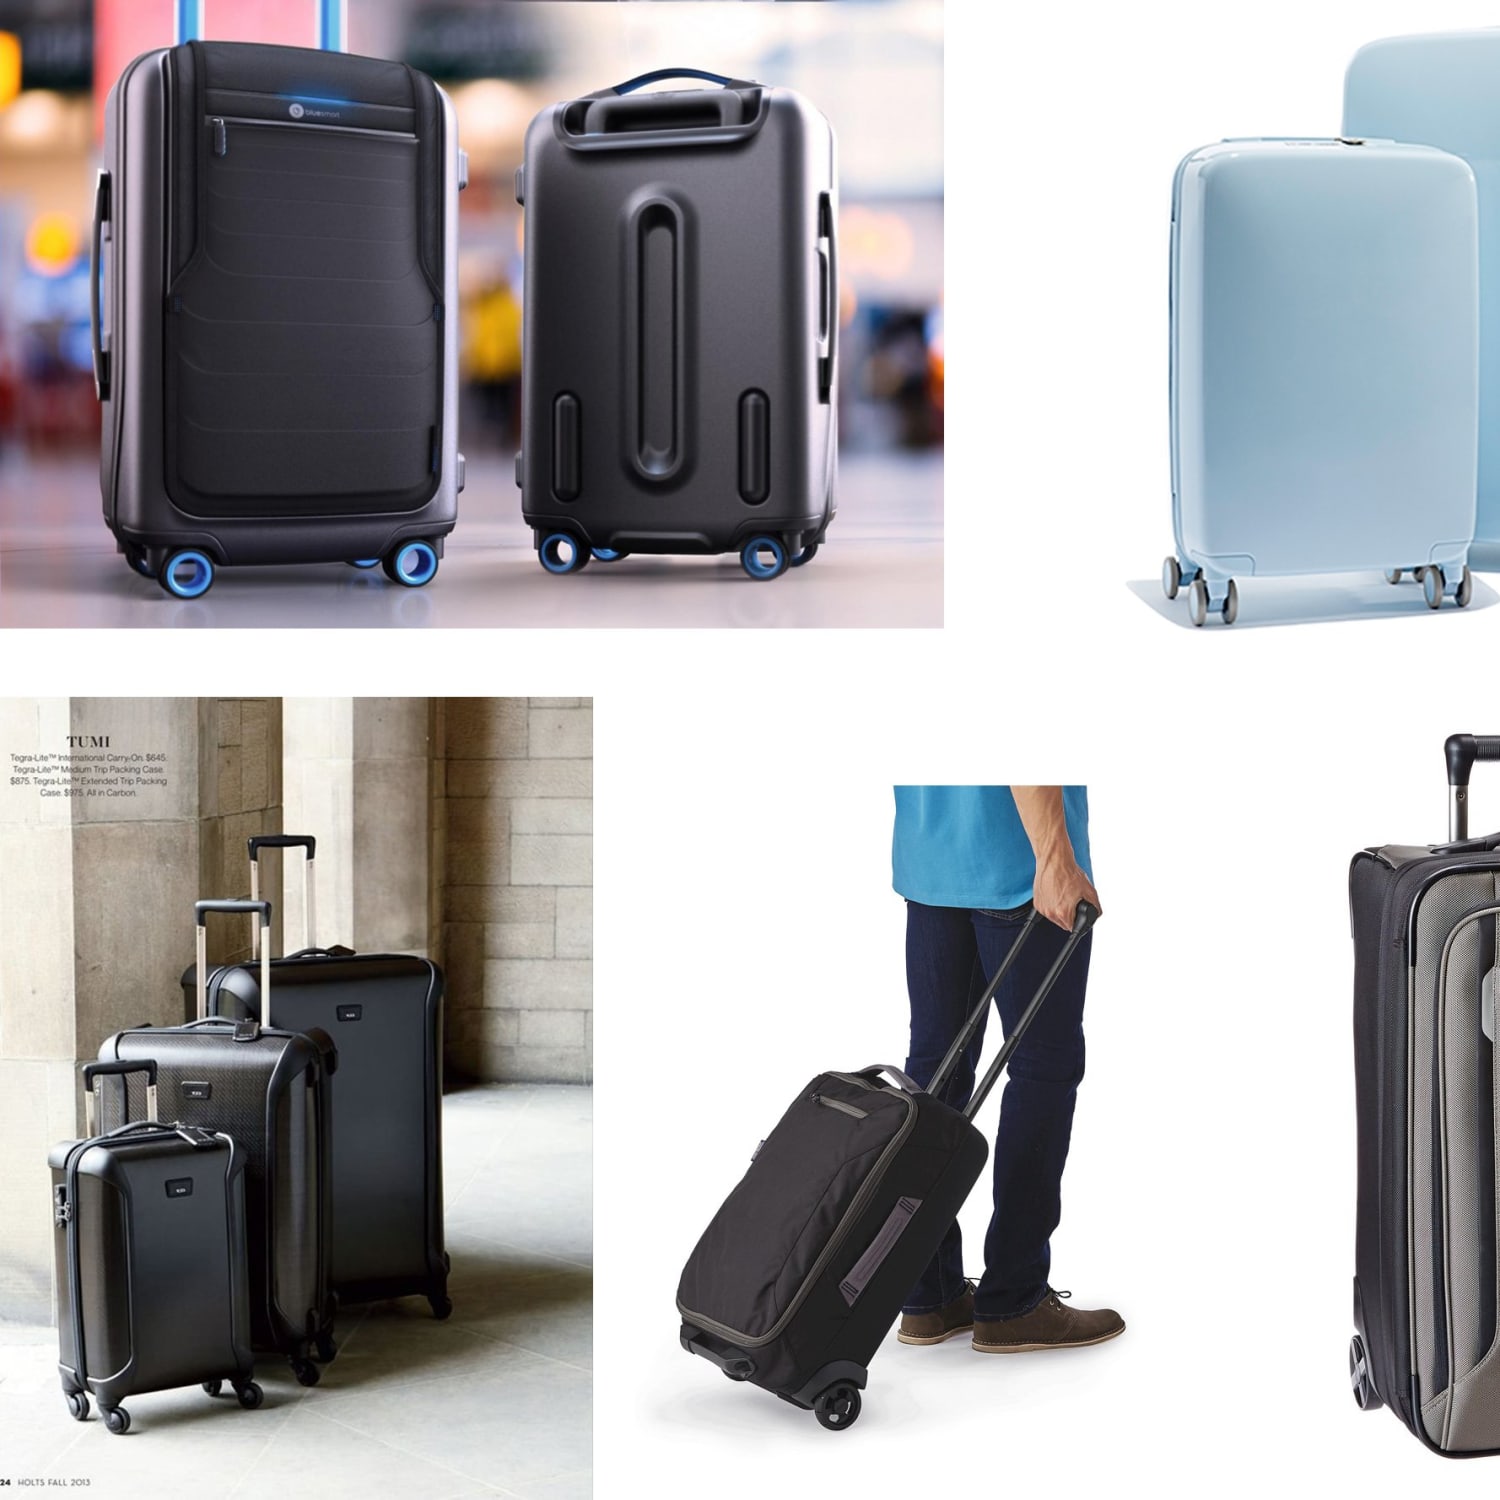 Luggage for a Trip: Raden, Patagonia, Tumi & 9 More | Apartment Therapy